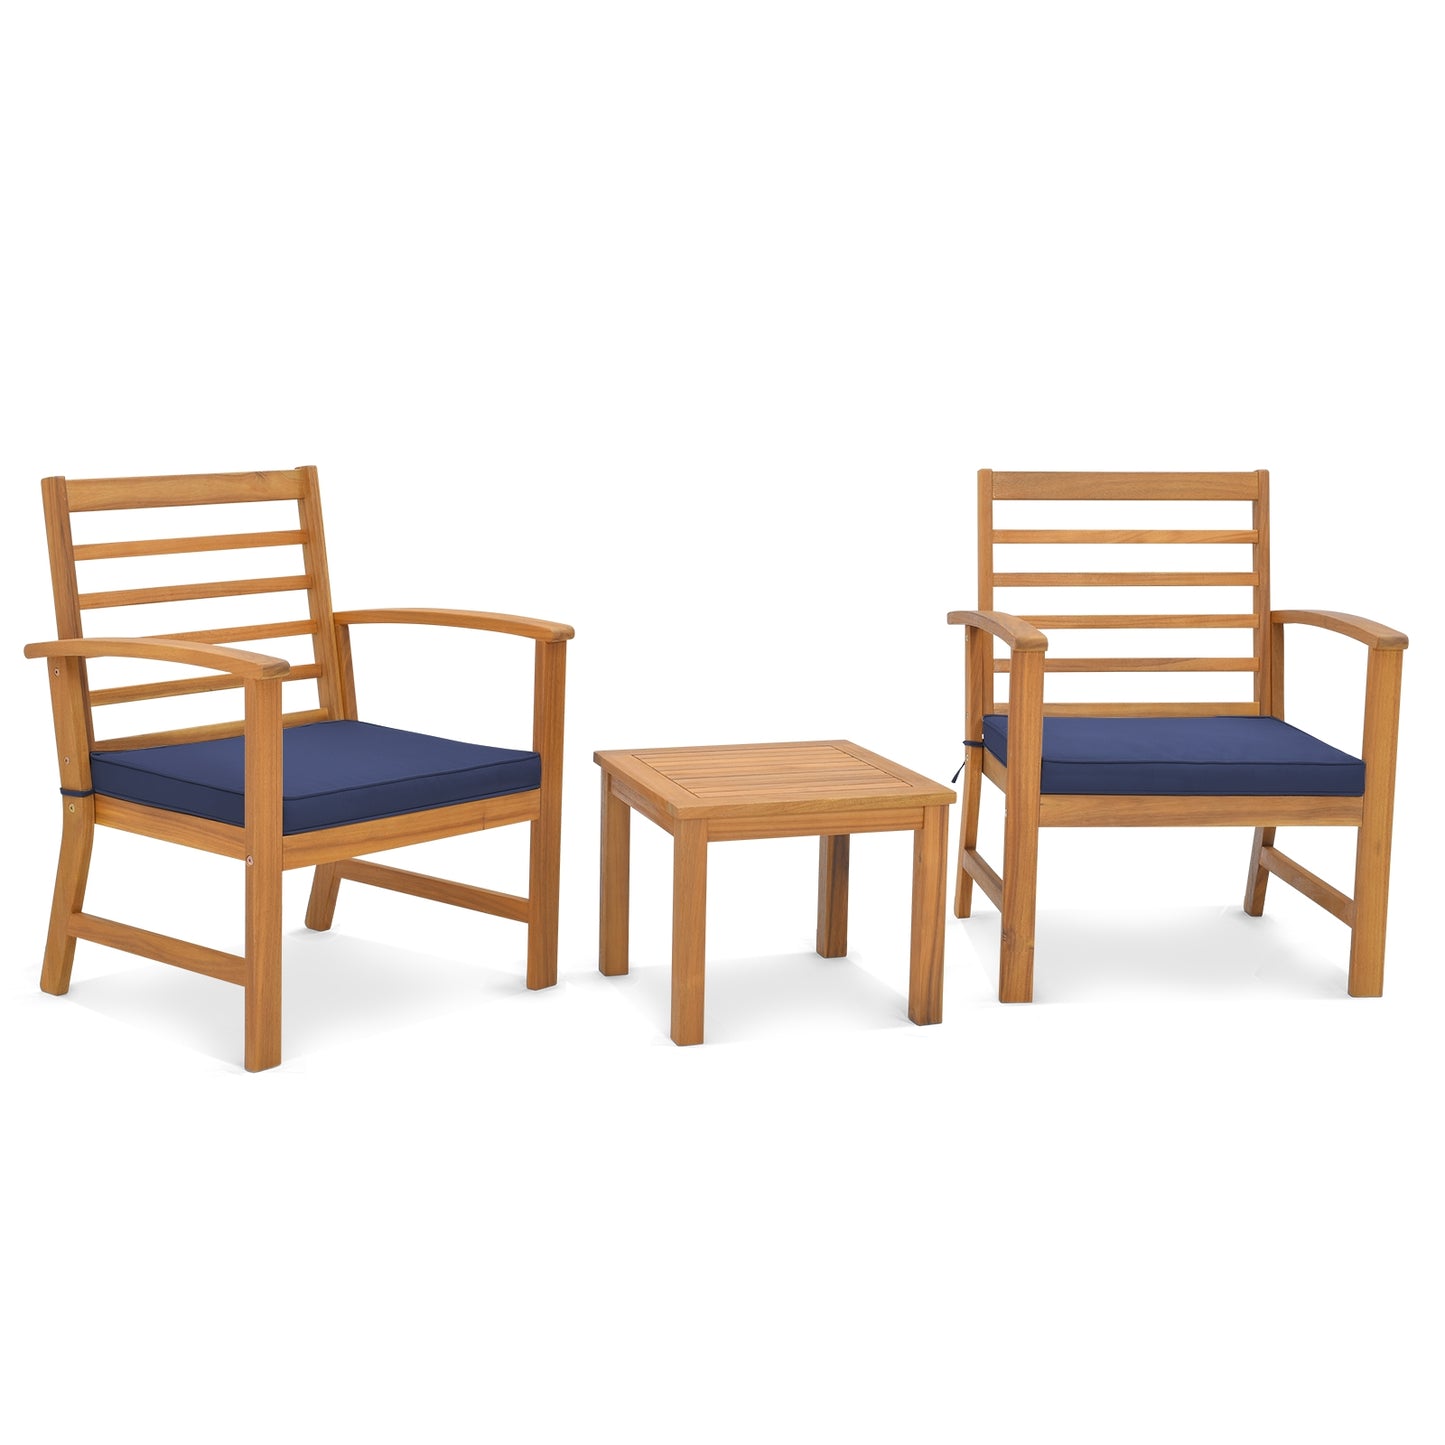 3 Pieces Outdoor Furniture Set with Soft Seat Cushions-Navy